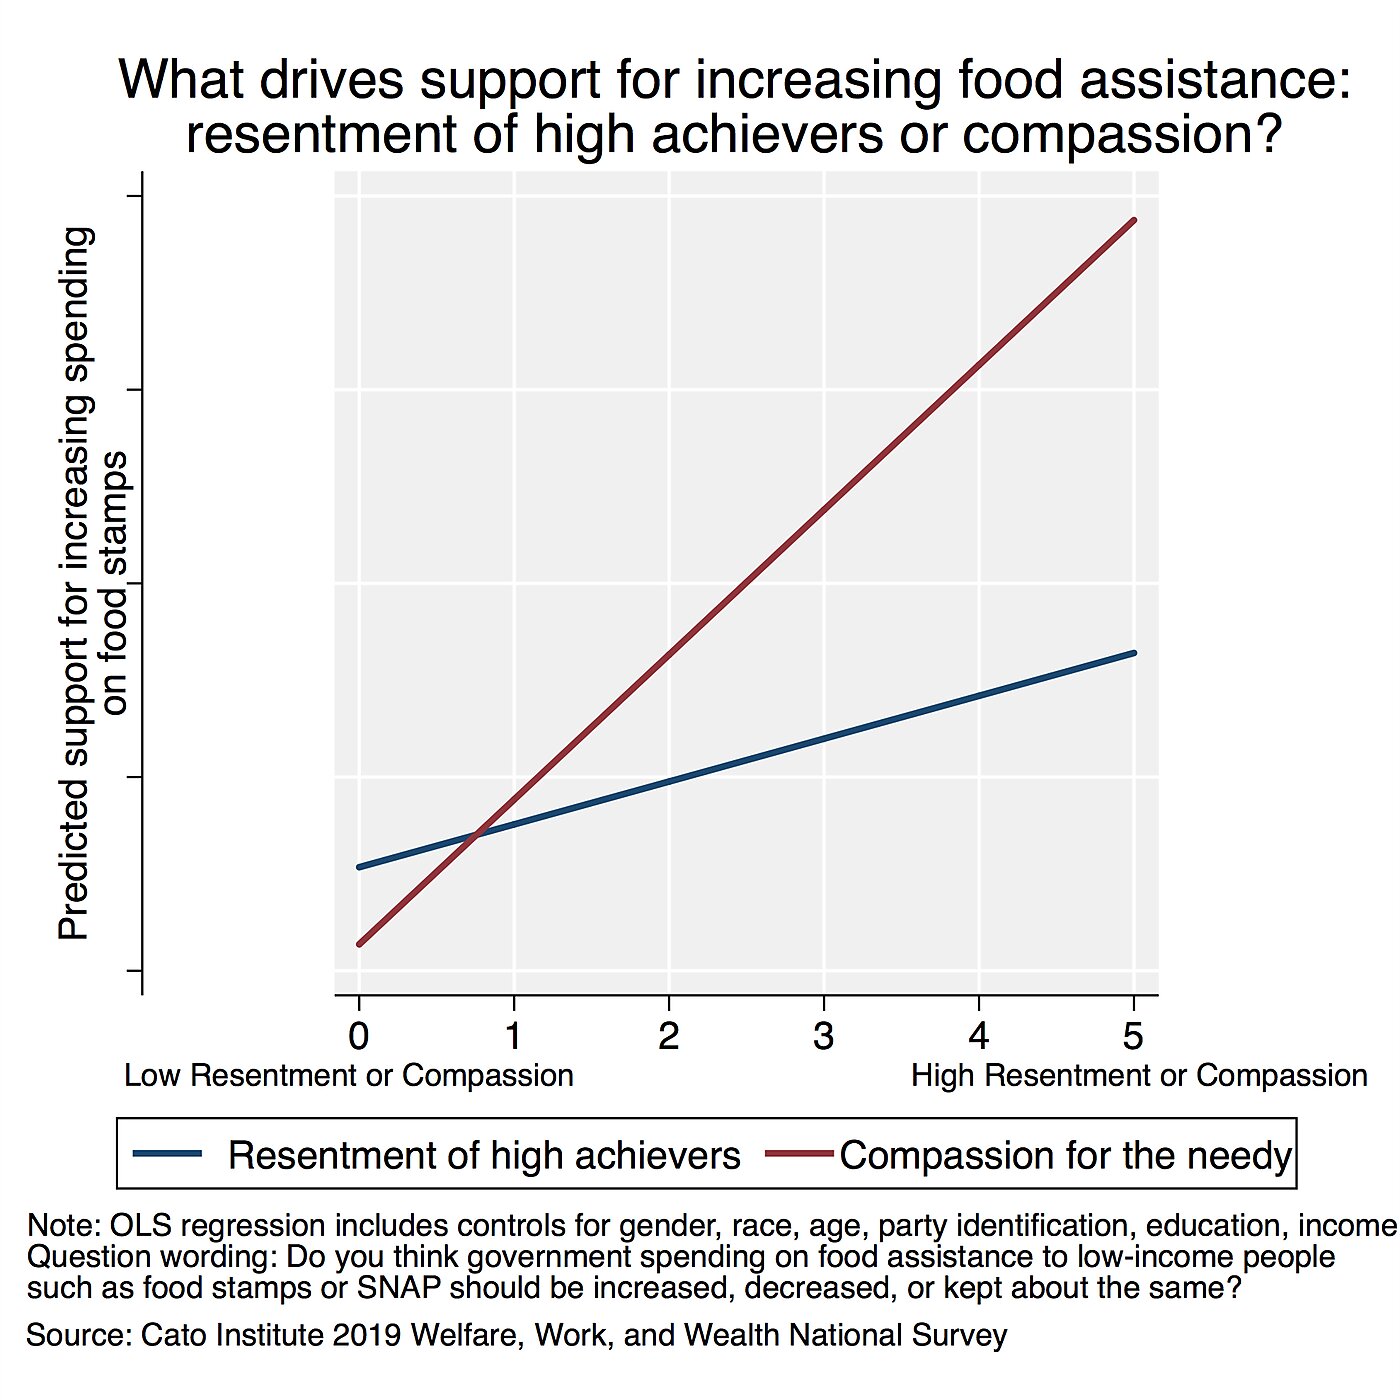 What drives support for food assistance